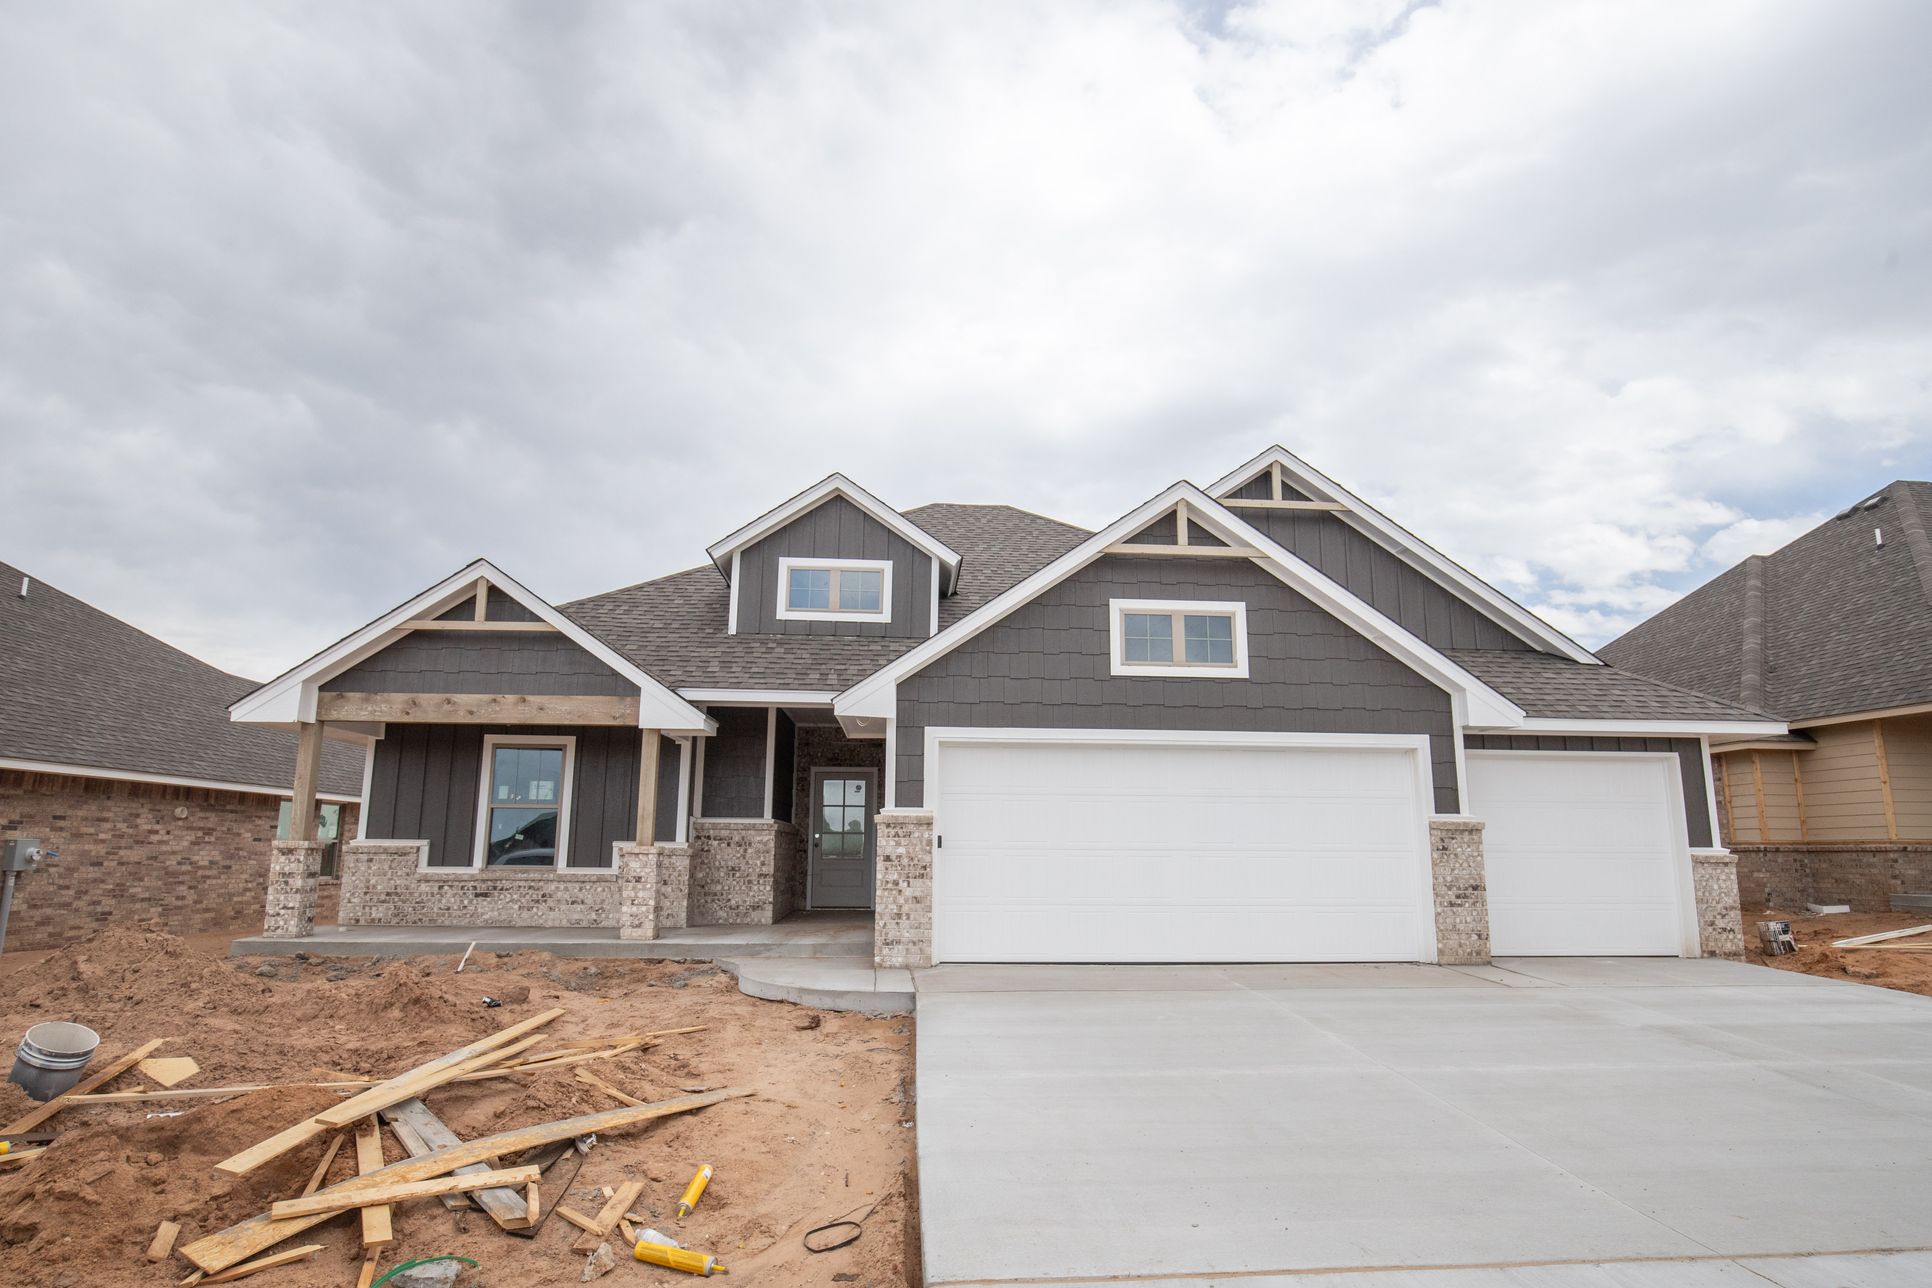 Homes by Taber Blue Spruce Floor Plan:Homes by Taber Blue Spruce Floor Plan